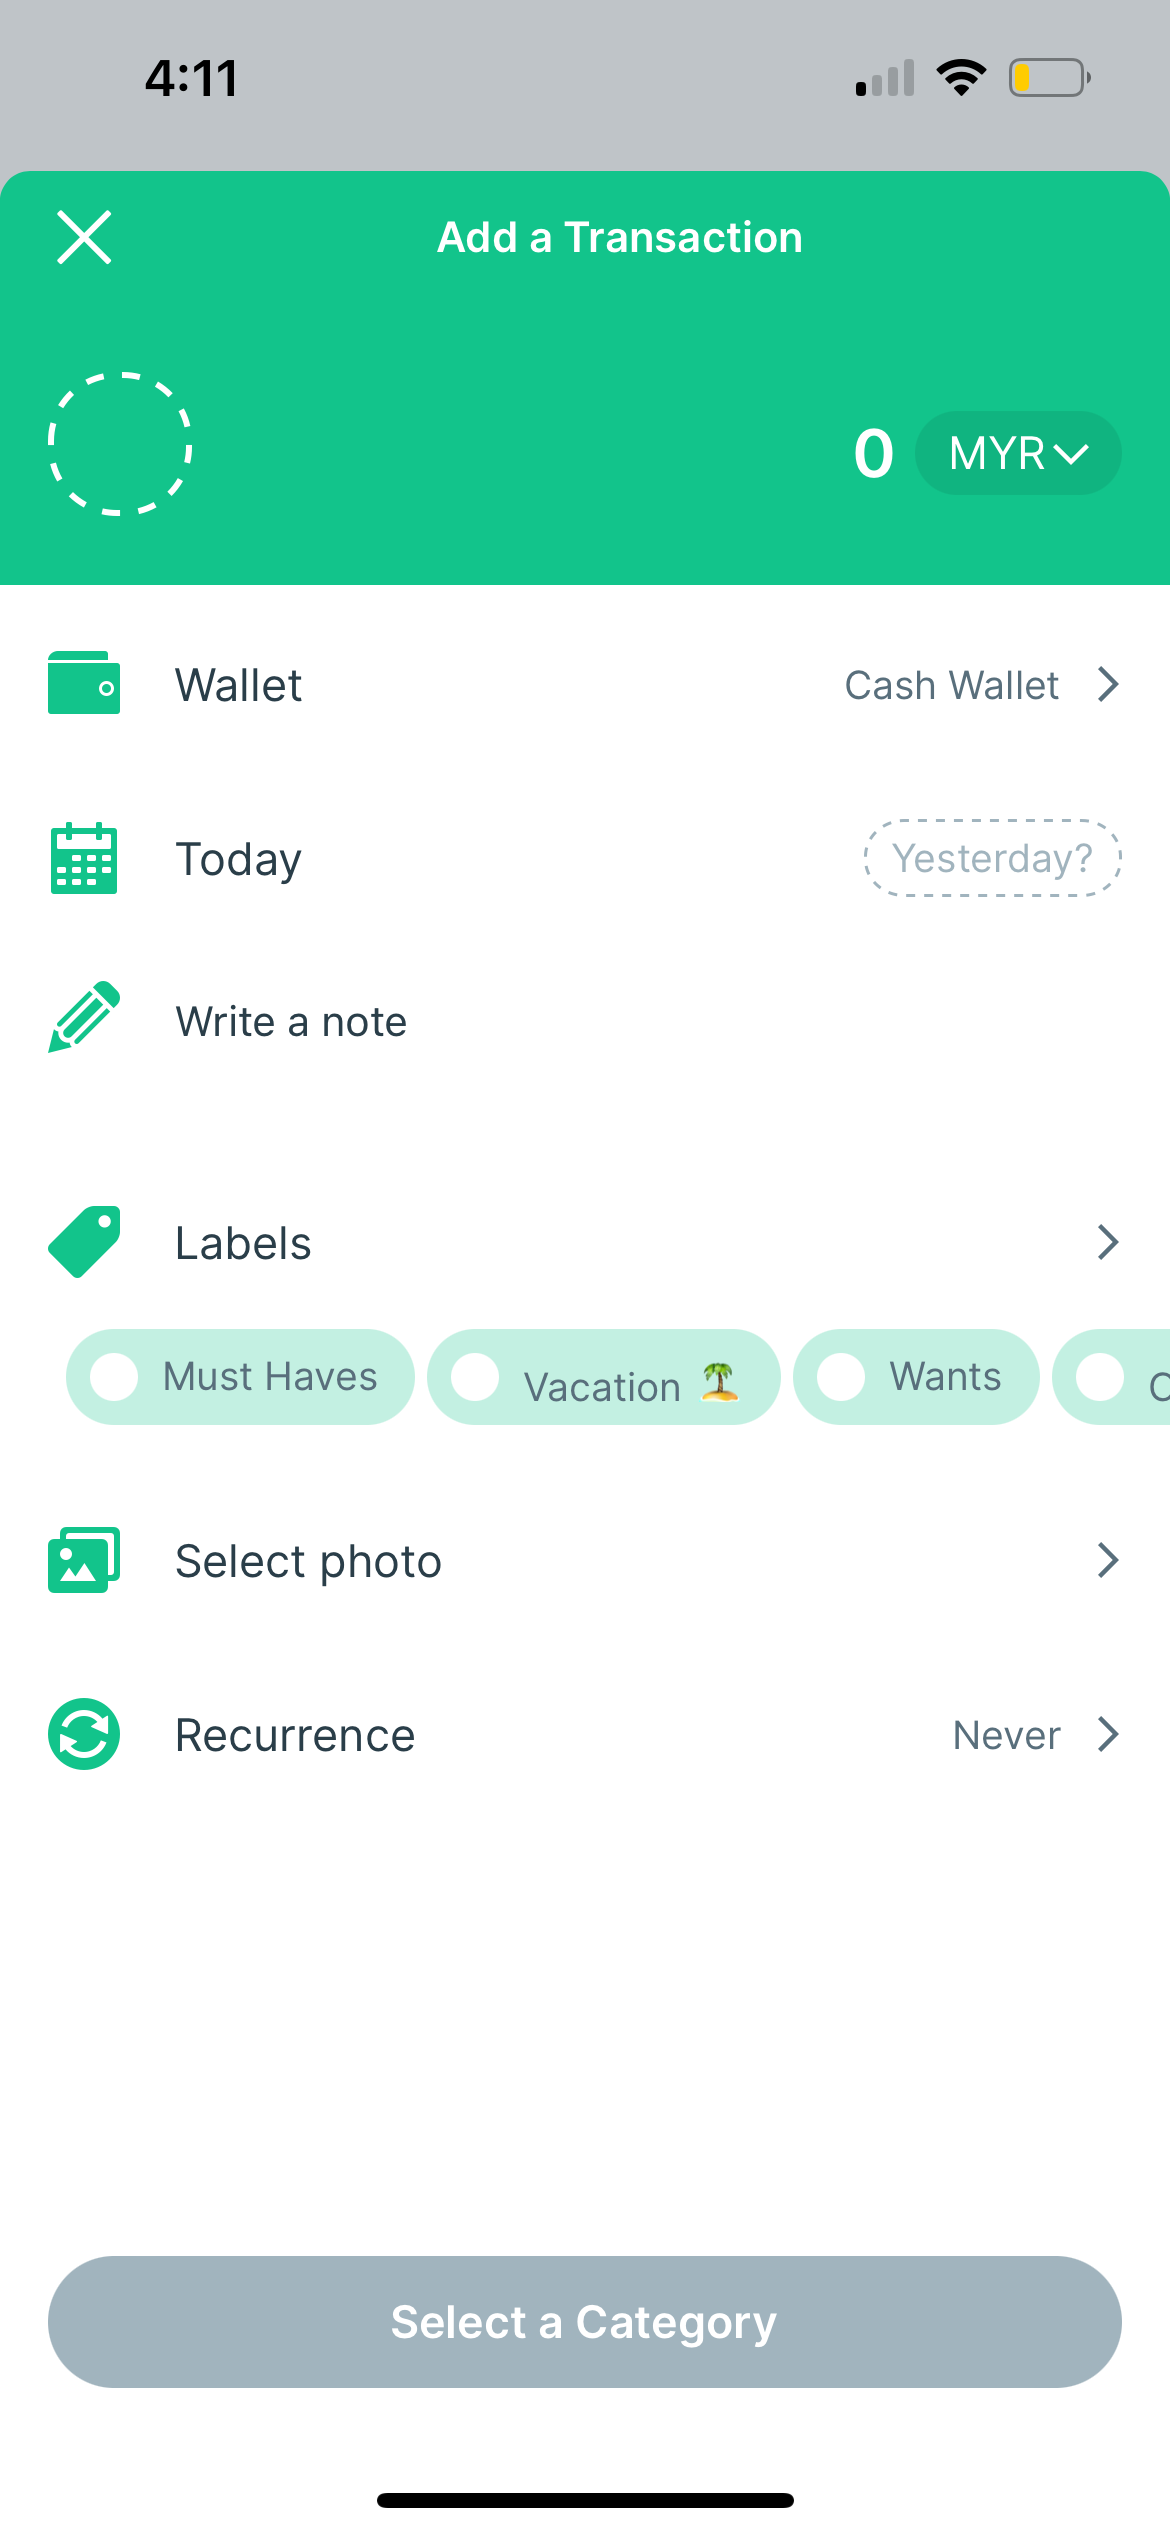 Add a transaction menu to your spending app